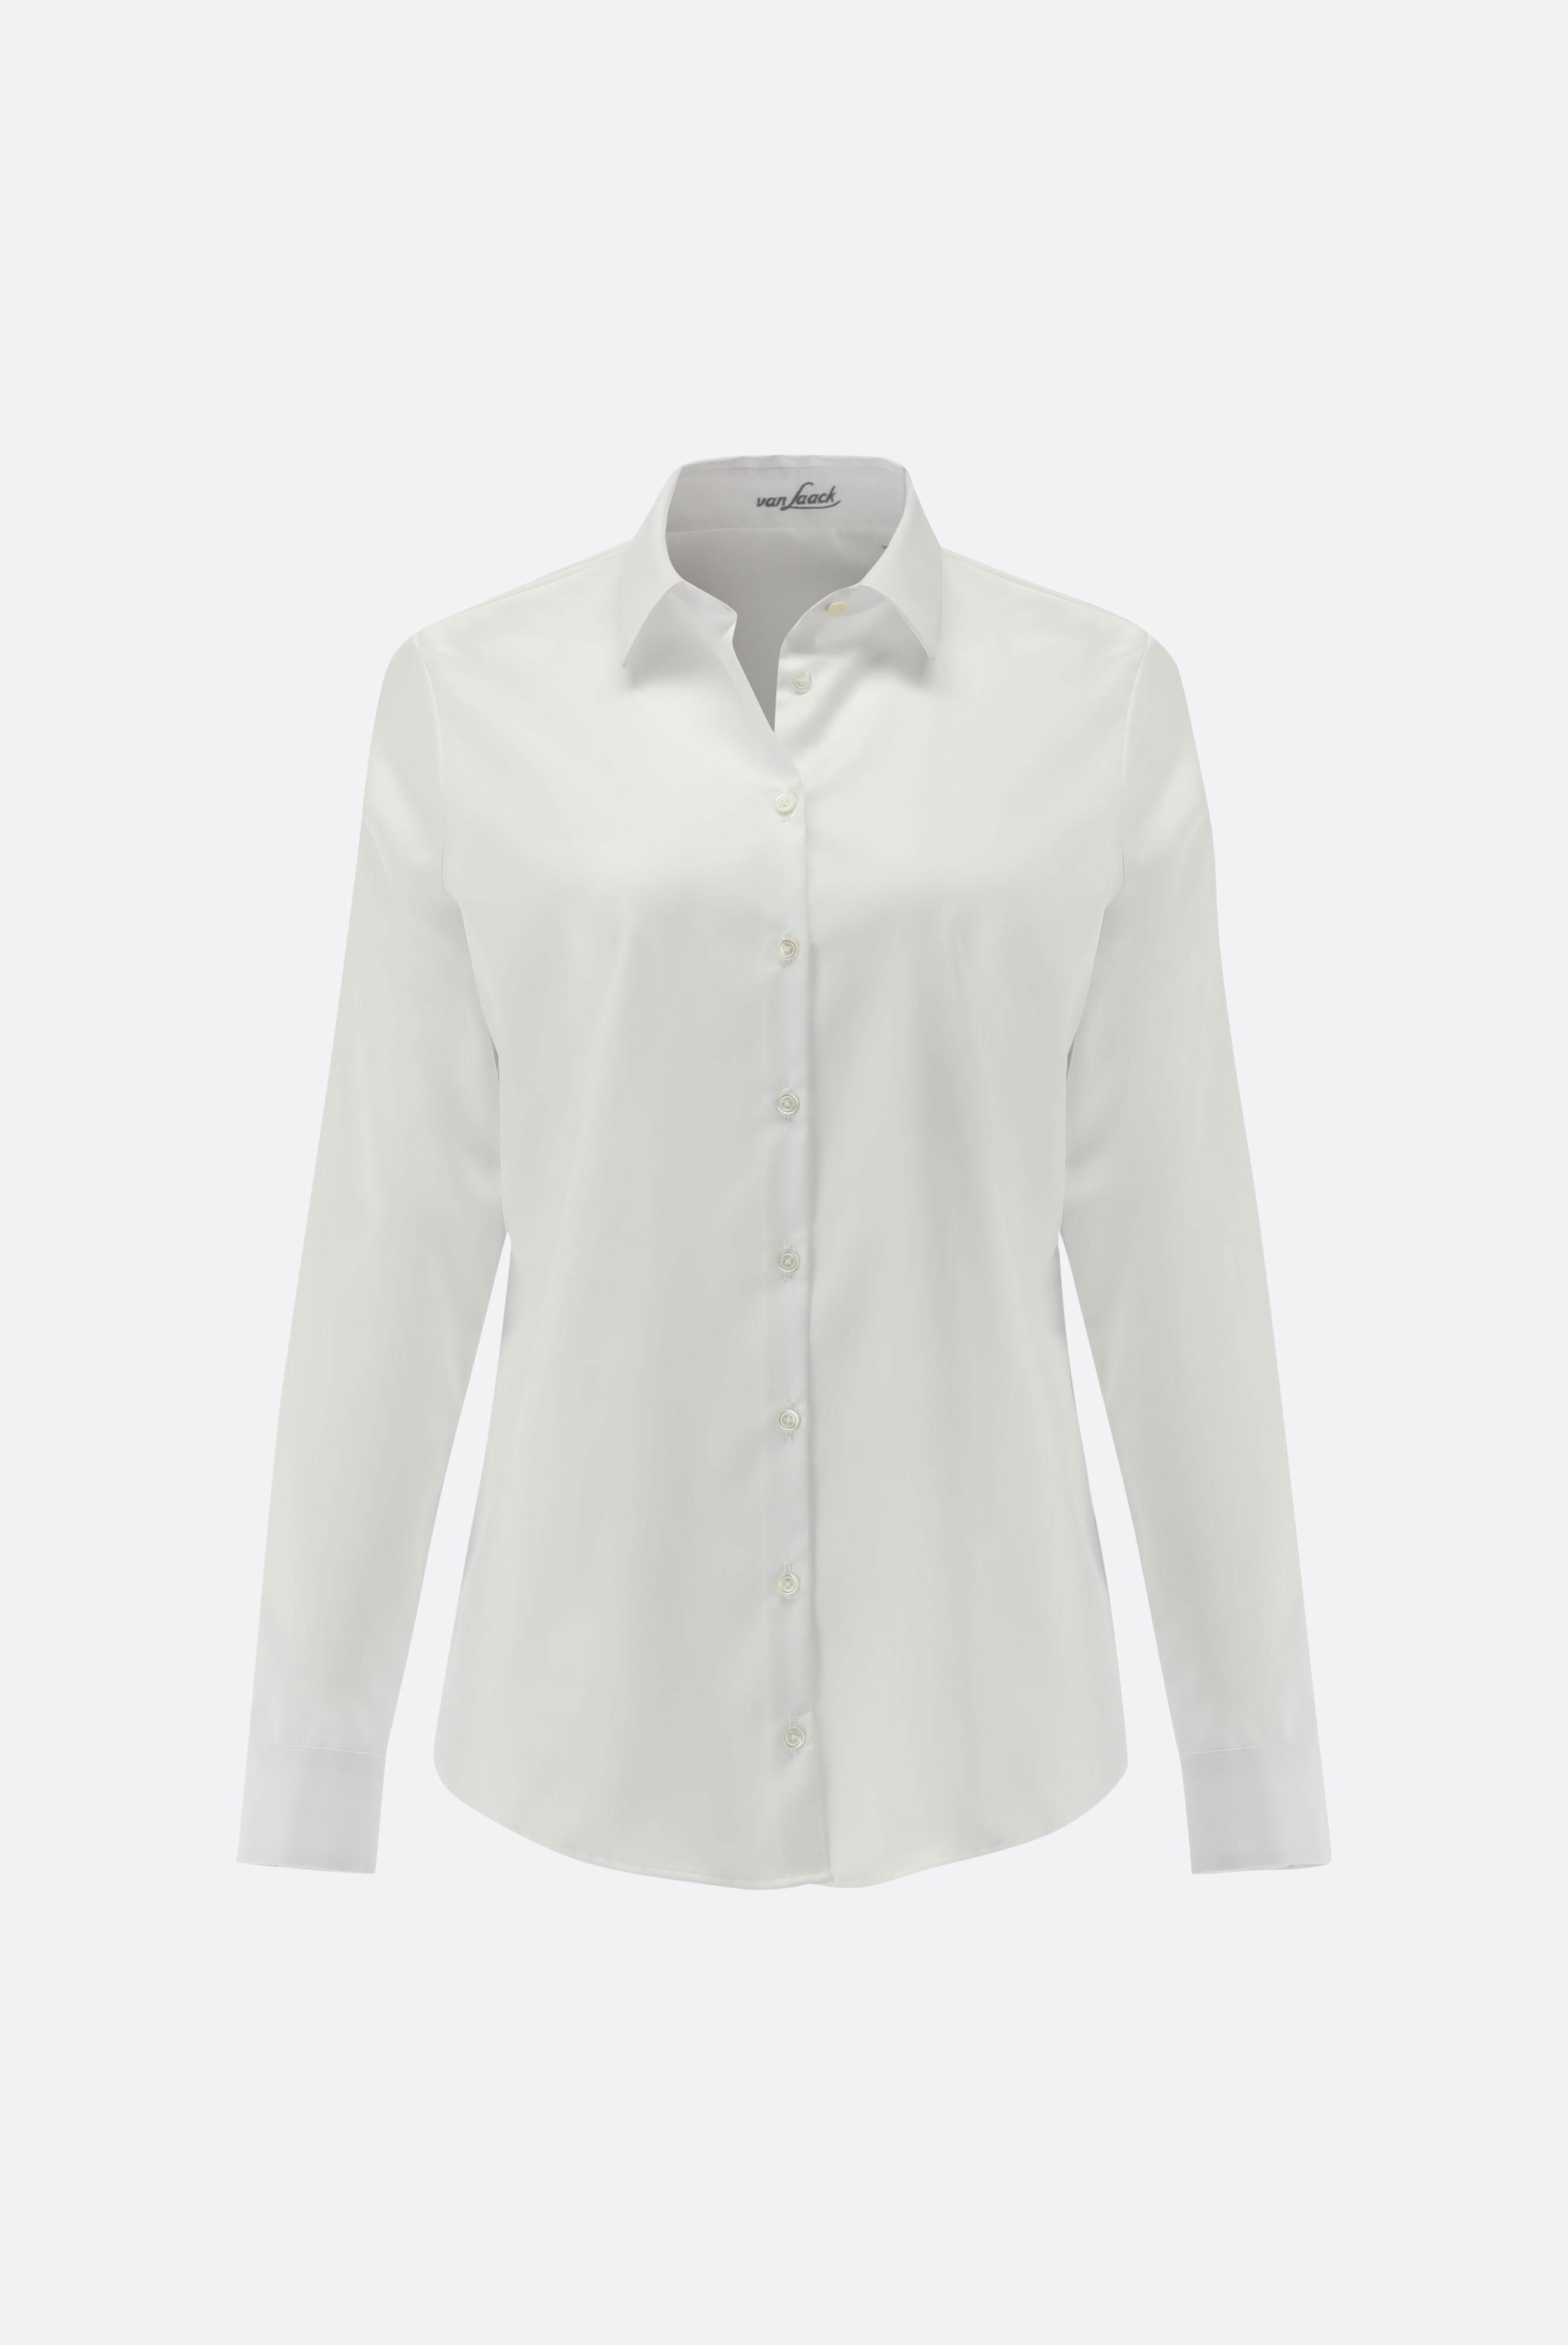 Business Blouses+Wrinkle Free Shirt Blouse+03.5442..133342.000.34